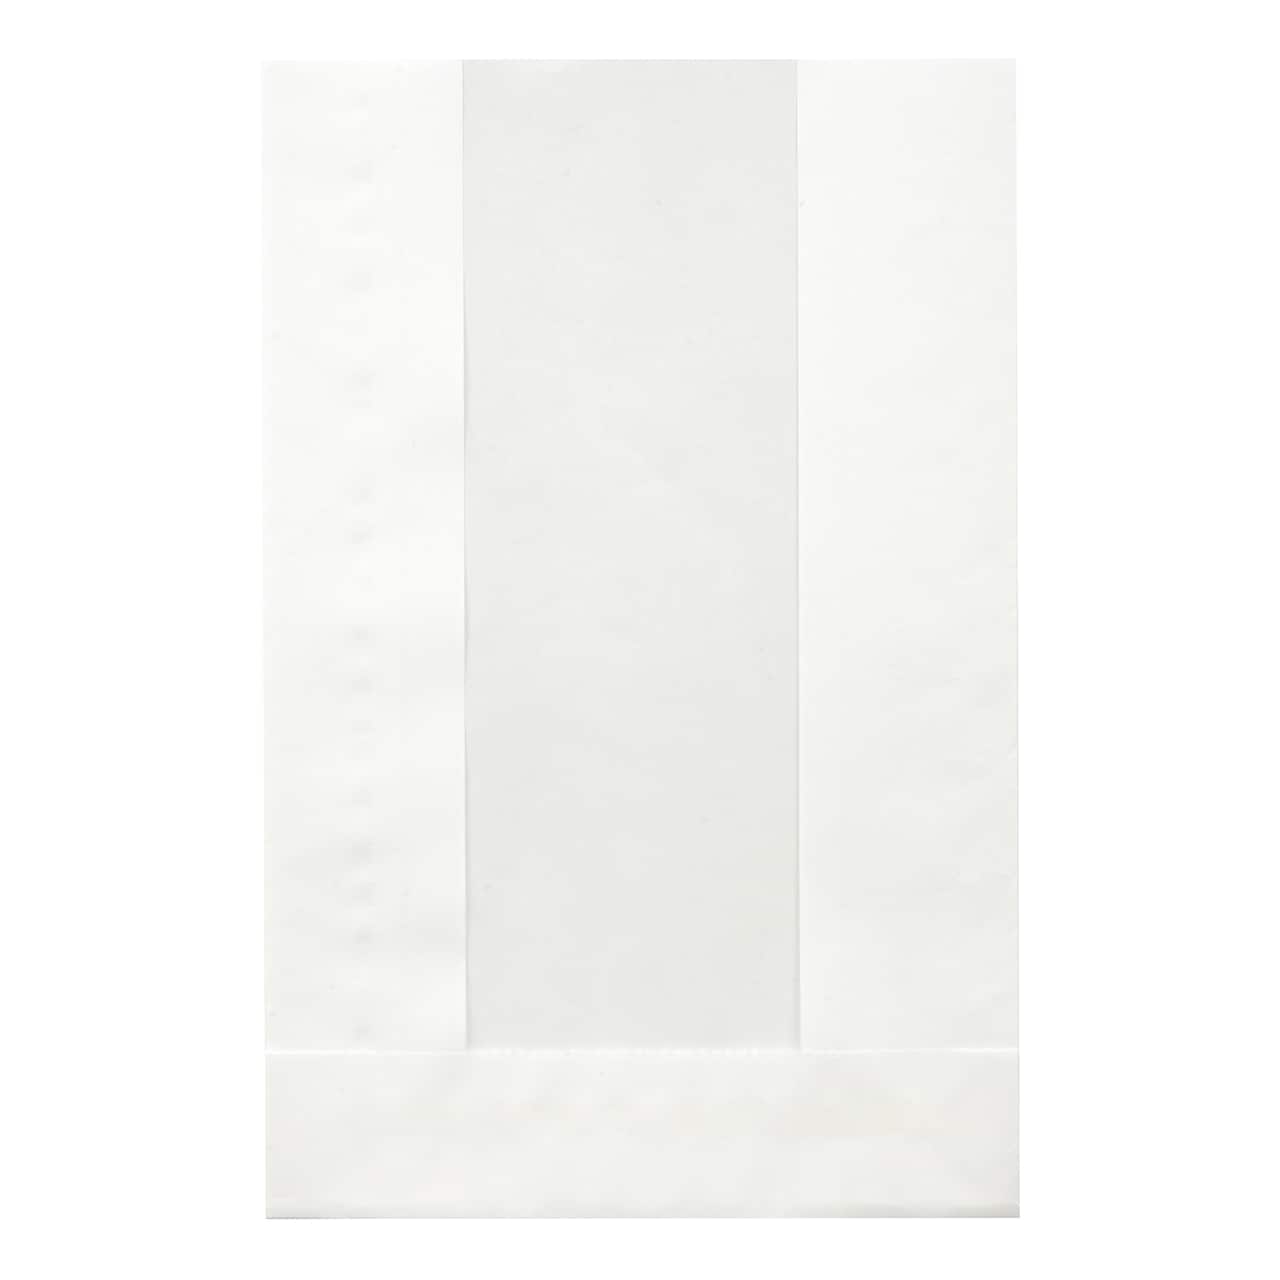 12 Packs: 25 ct. (300 total) White Grease-Resistant Window Treat Bags by Celebrate It&#xAE;